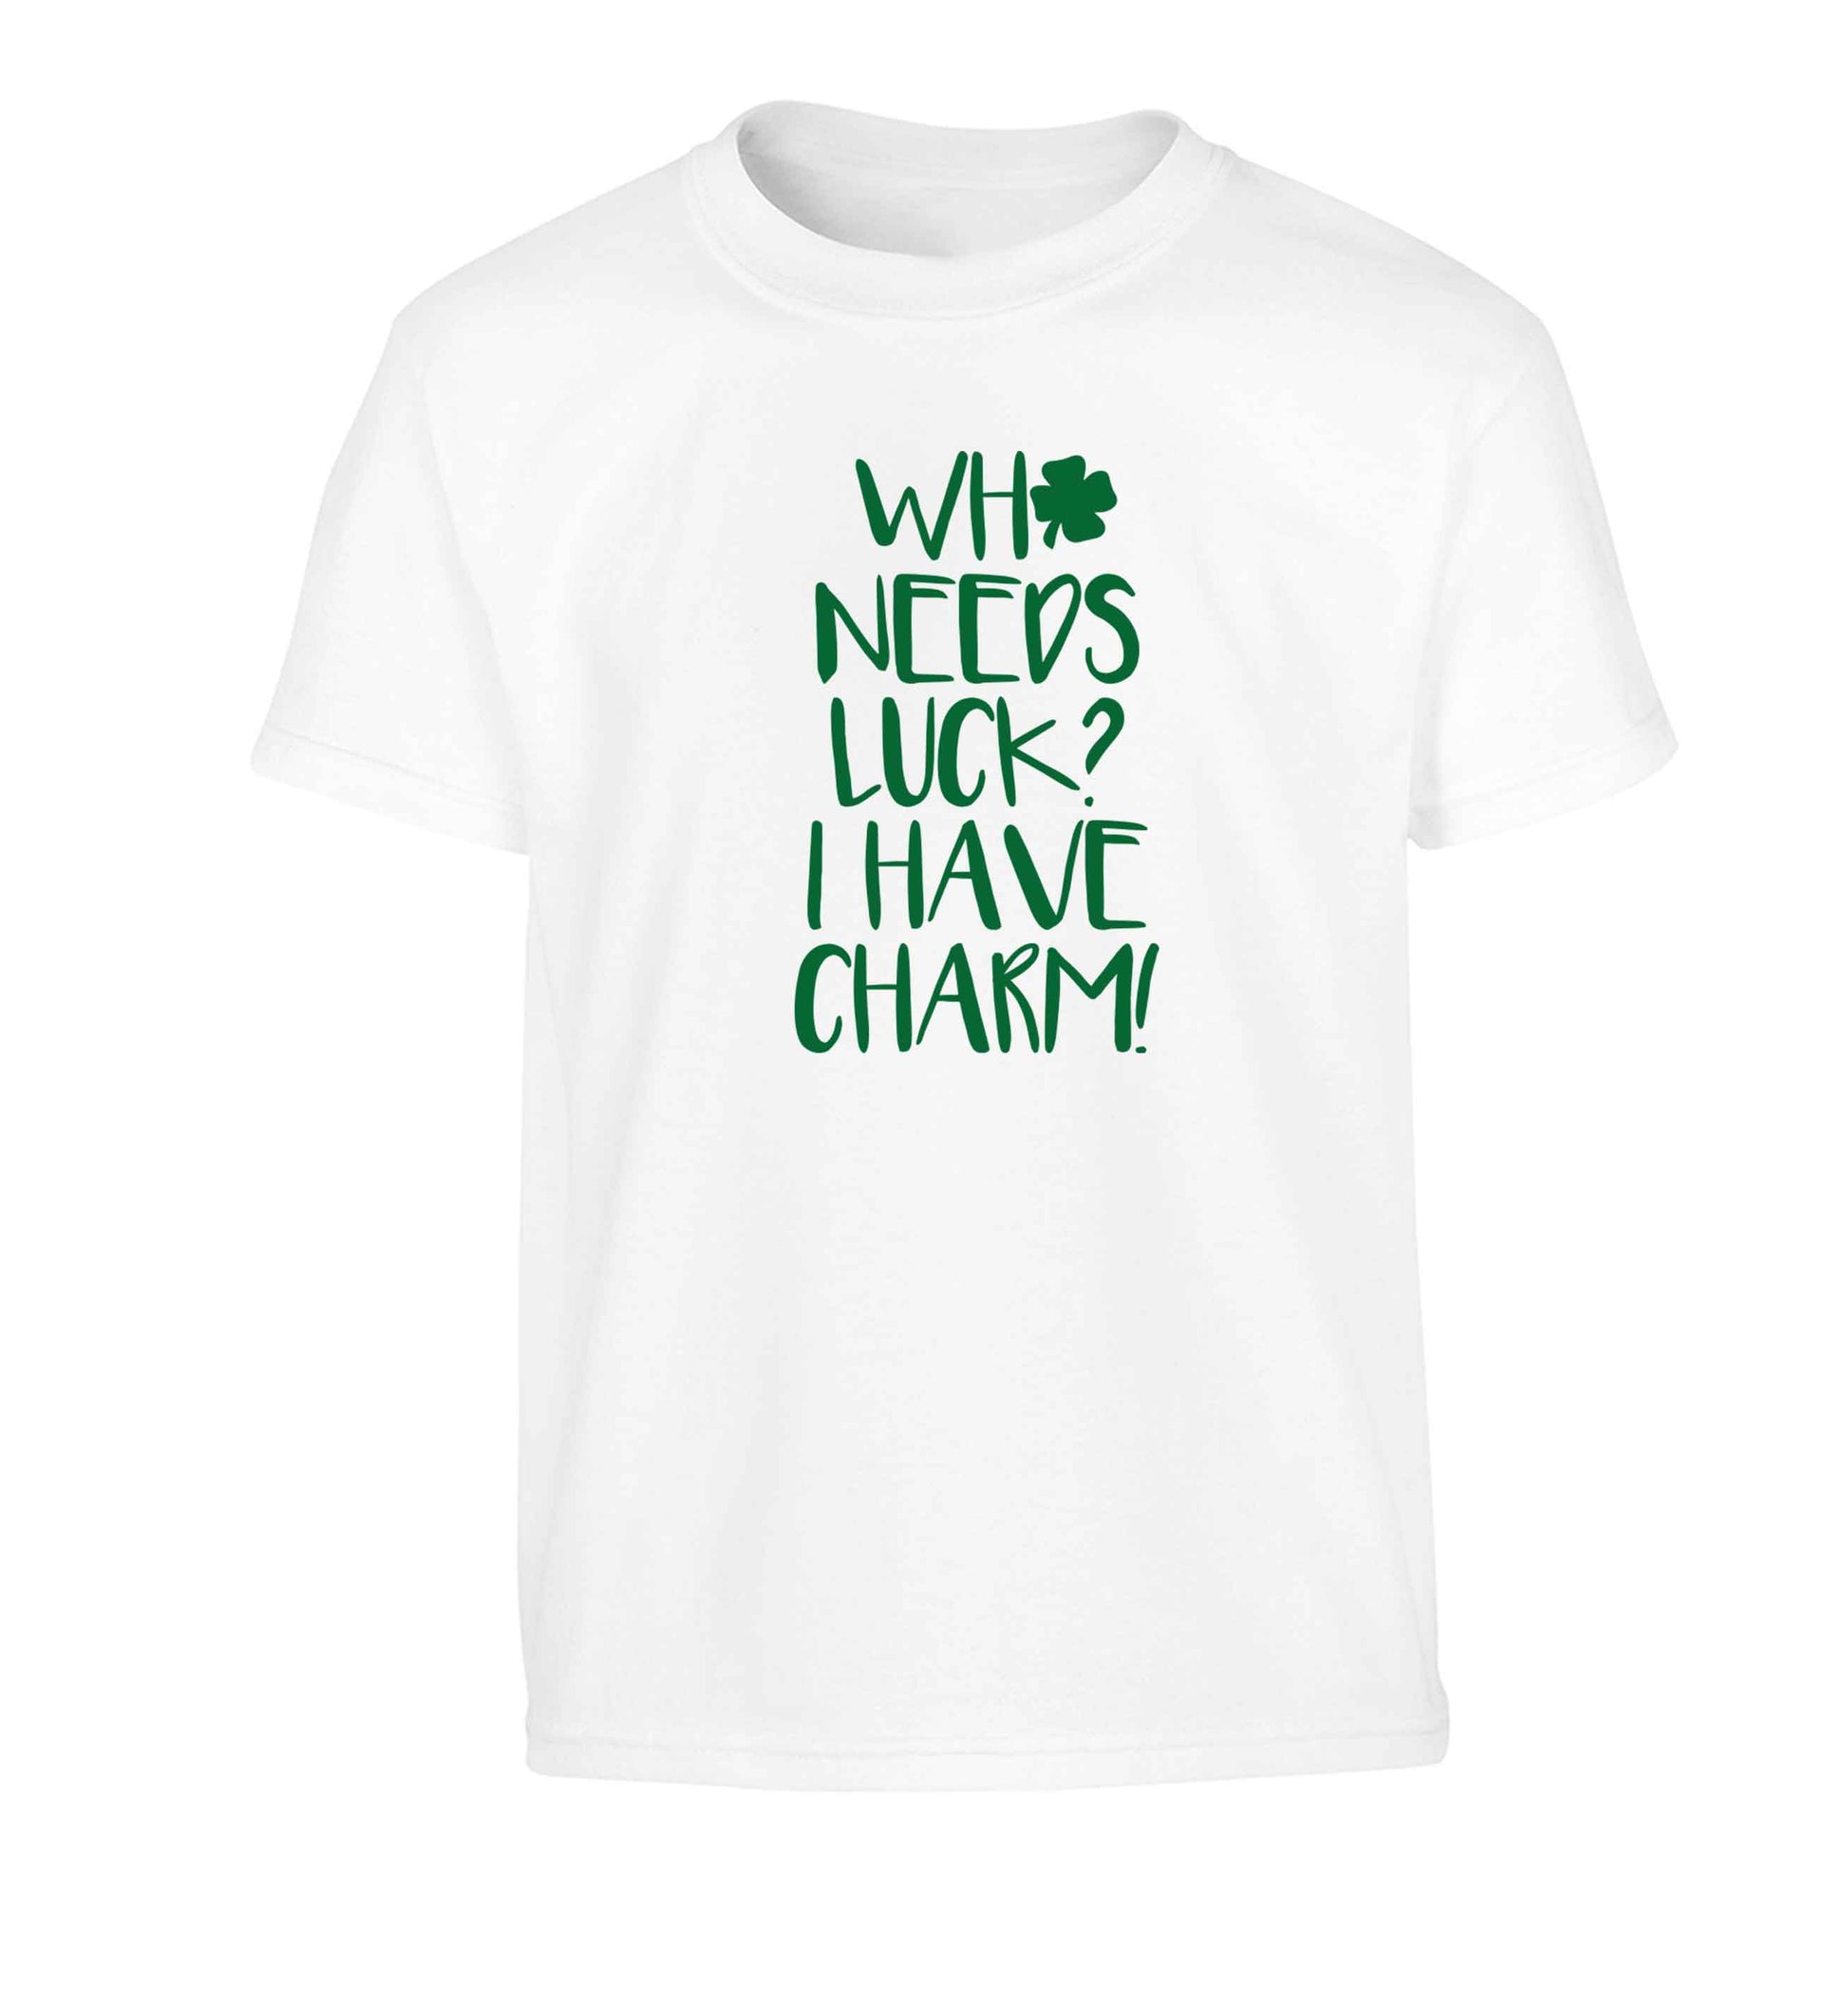 Who needs luck? I have charm! Children's white Tshirt 12-13 Years